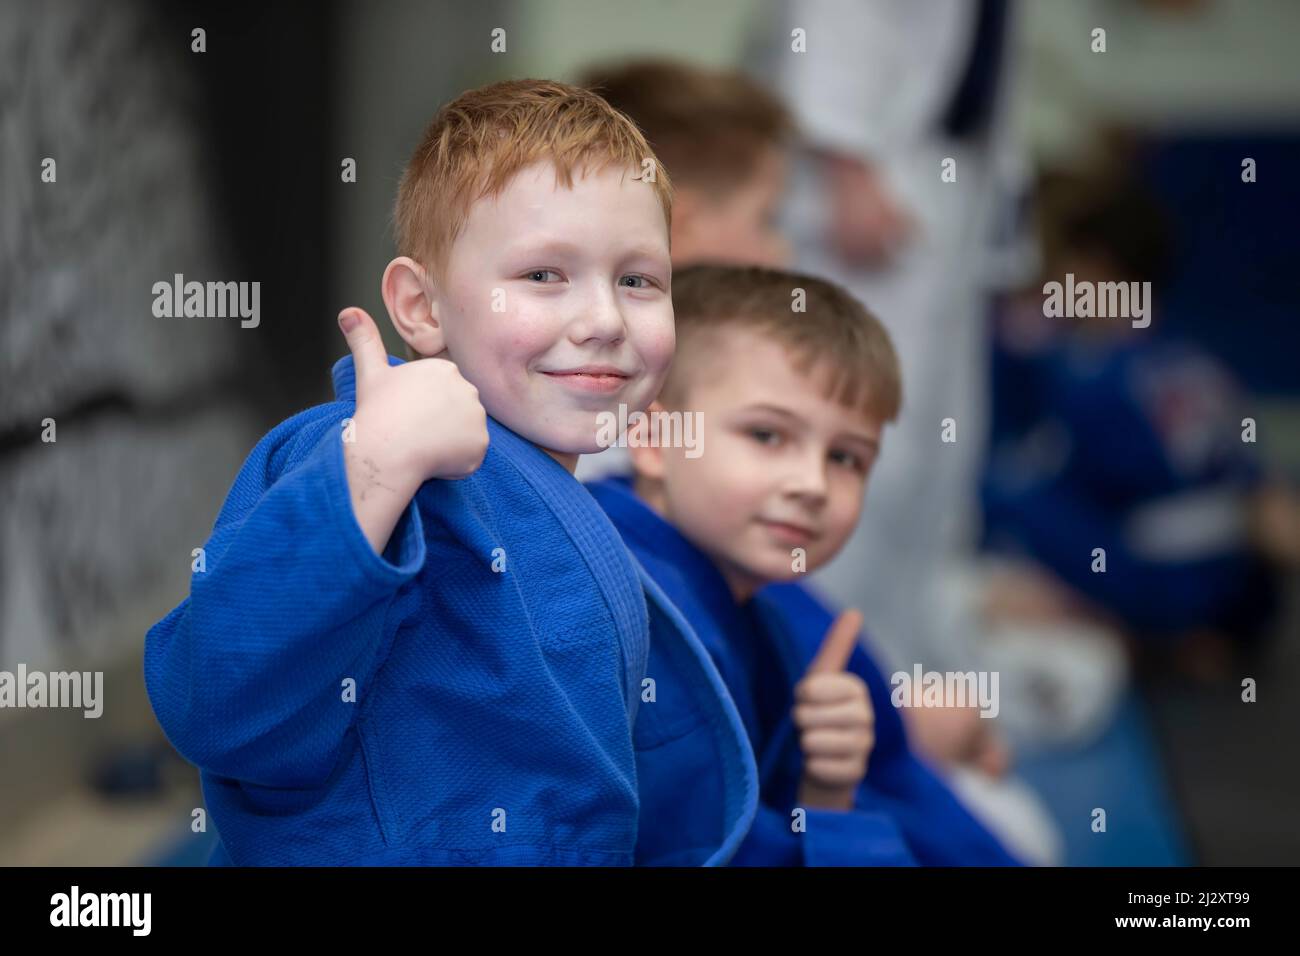 Judo school for children. Children judoists show the class sign with their fingers. Stock Photo